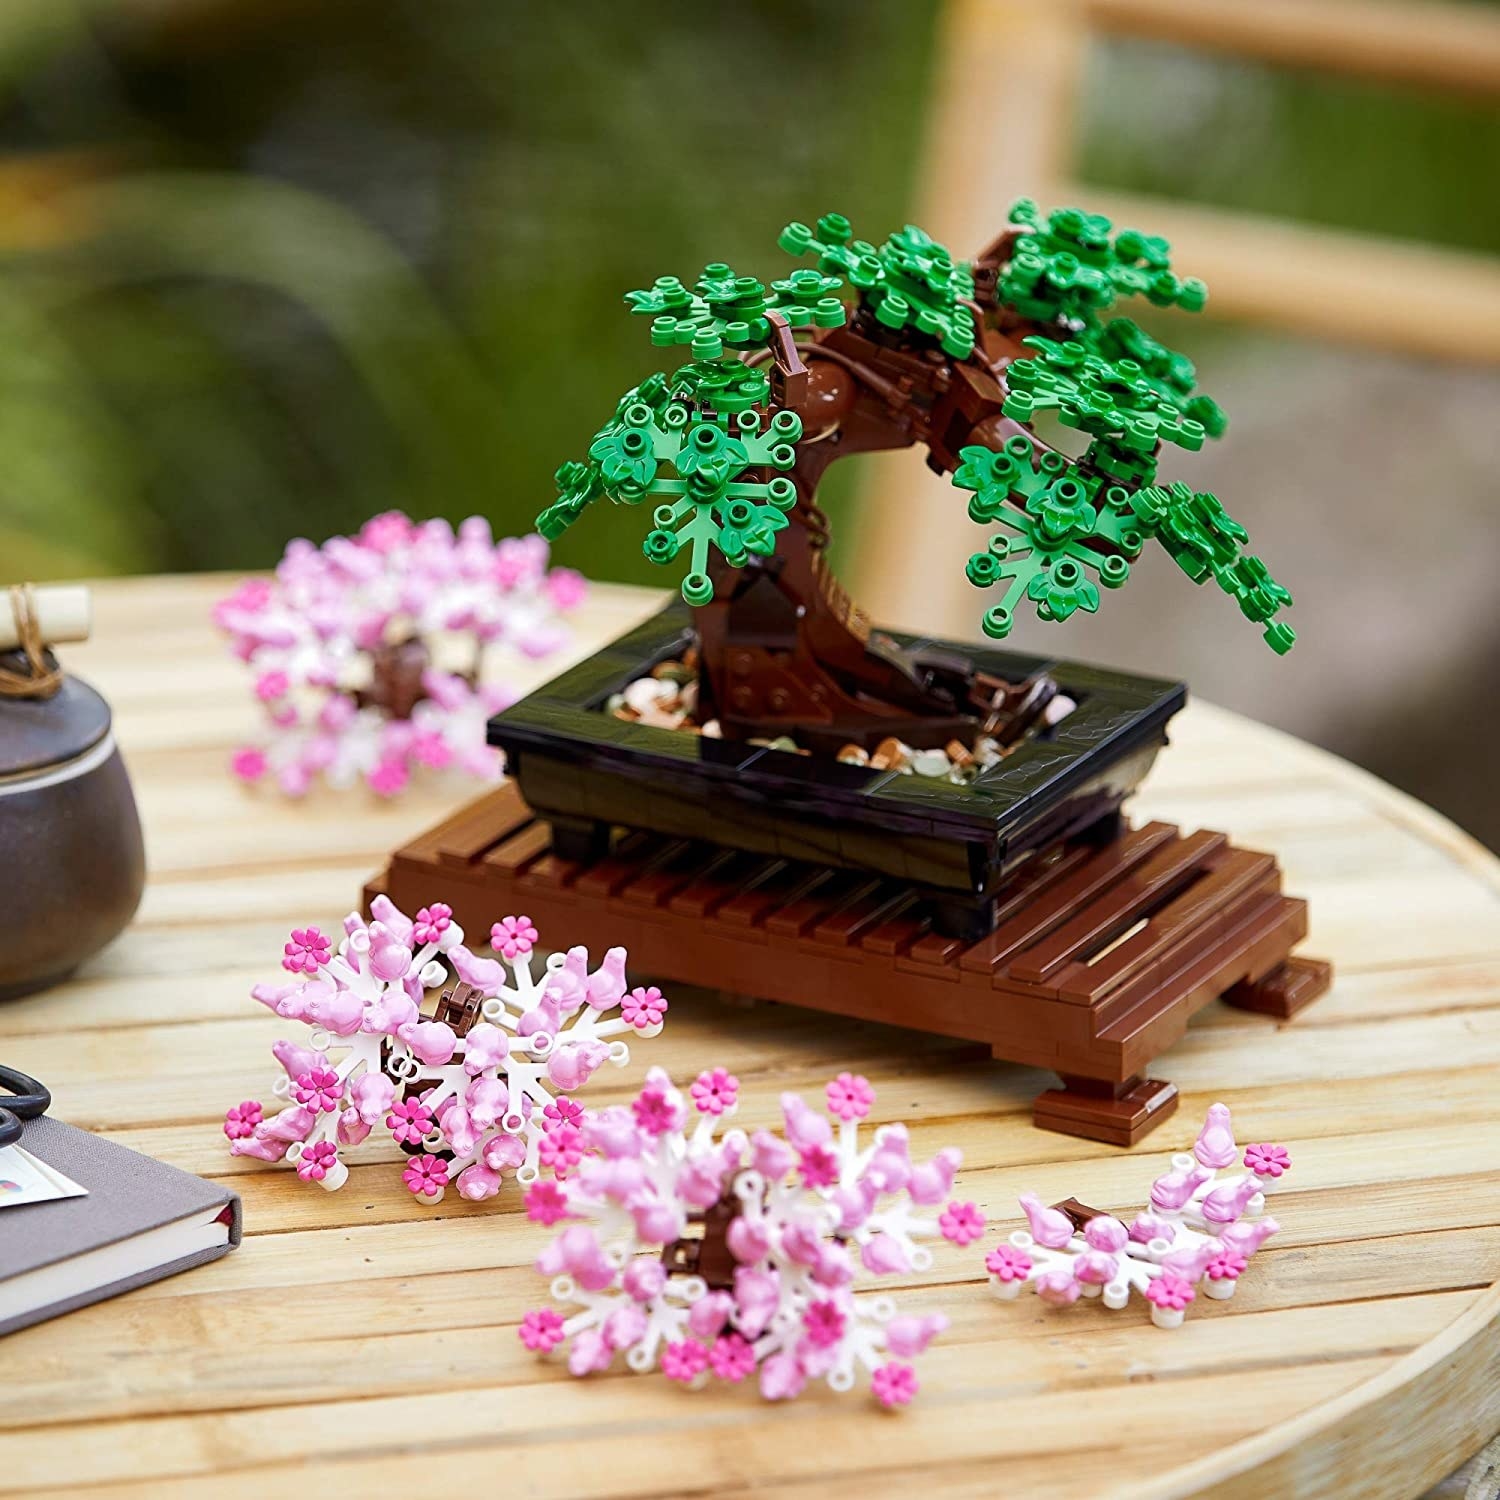 the lego bonsai tree with the cherry blossom leaves on a table